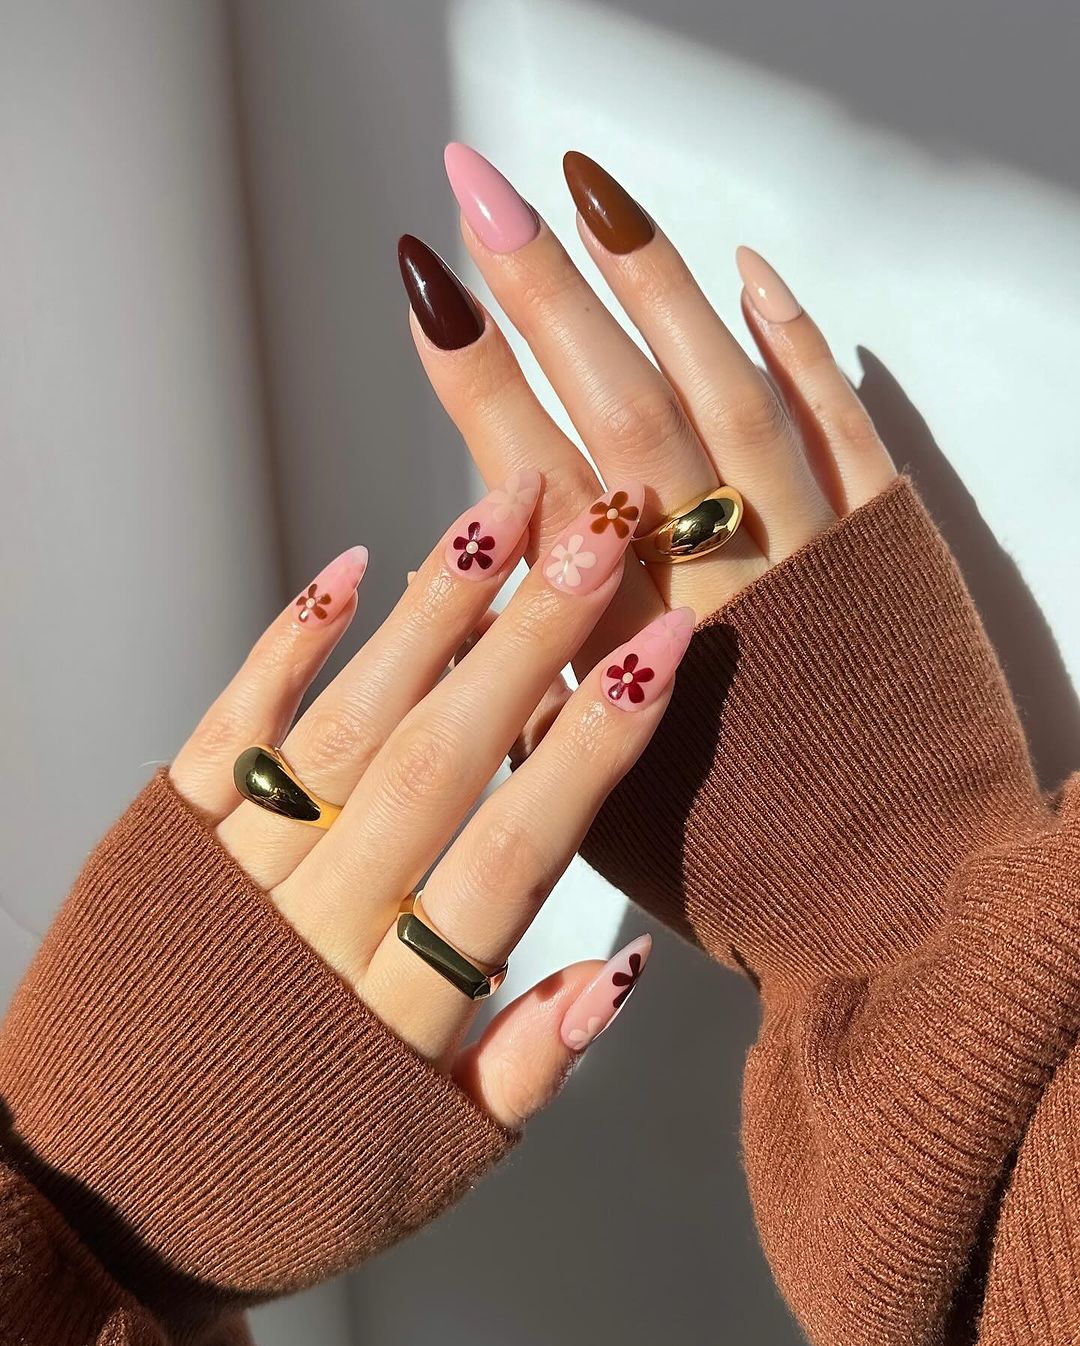 Top 10 Nail Design Ideas and Inspiration for Fall 2023 | Autumn Floral Nails